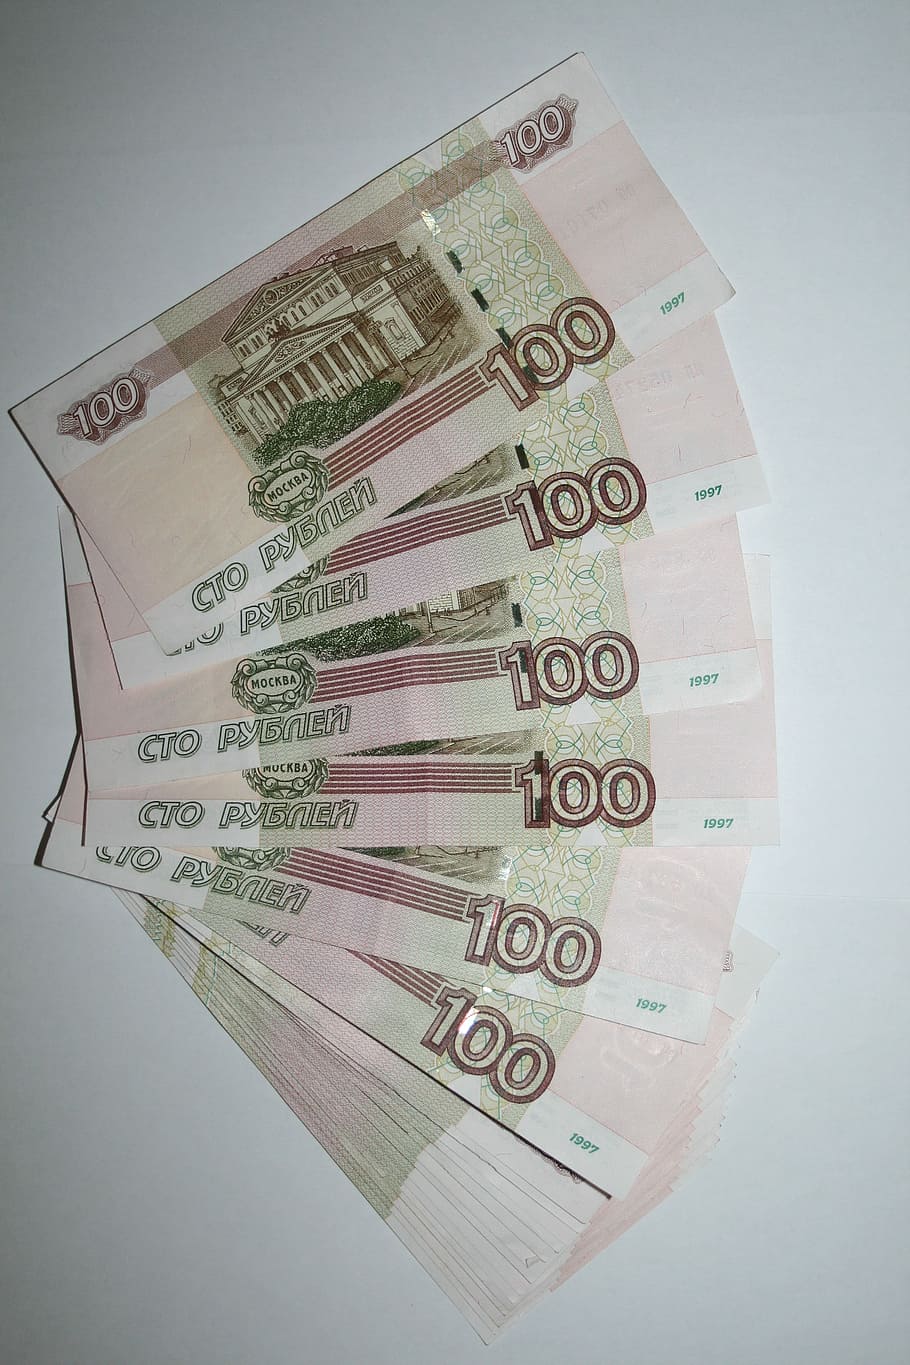 Money, Ruble, Bills, Rubles, 100 rubles, finance, paper currency, currency, wealth, savings